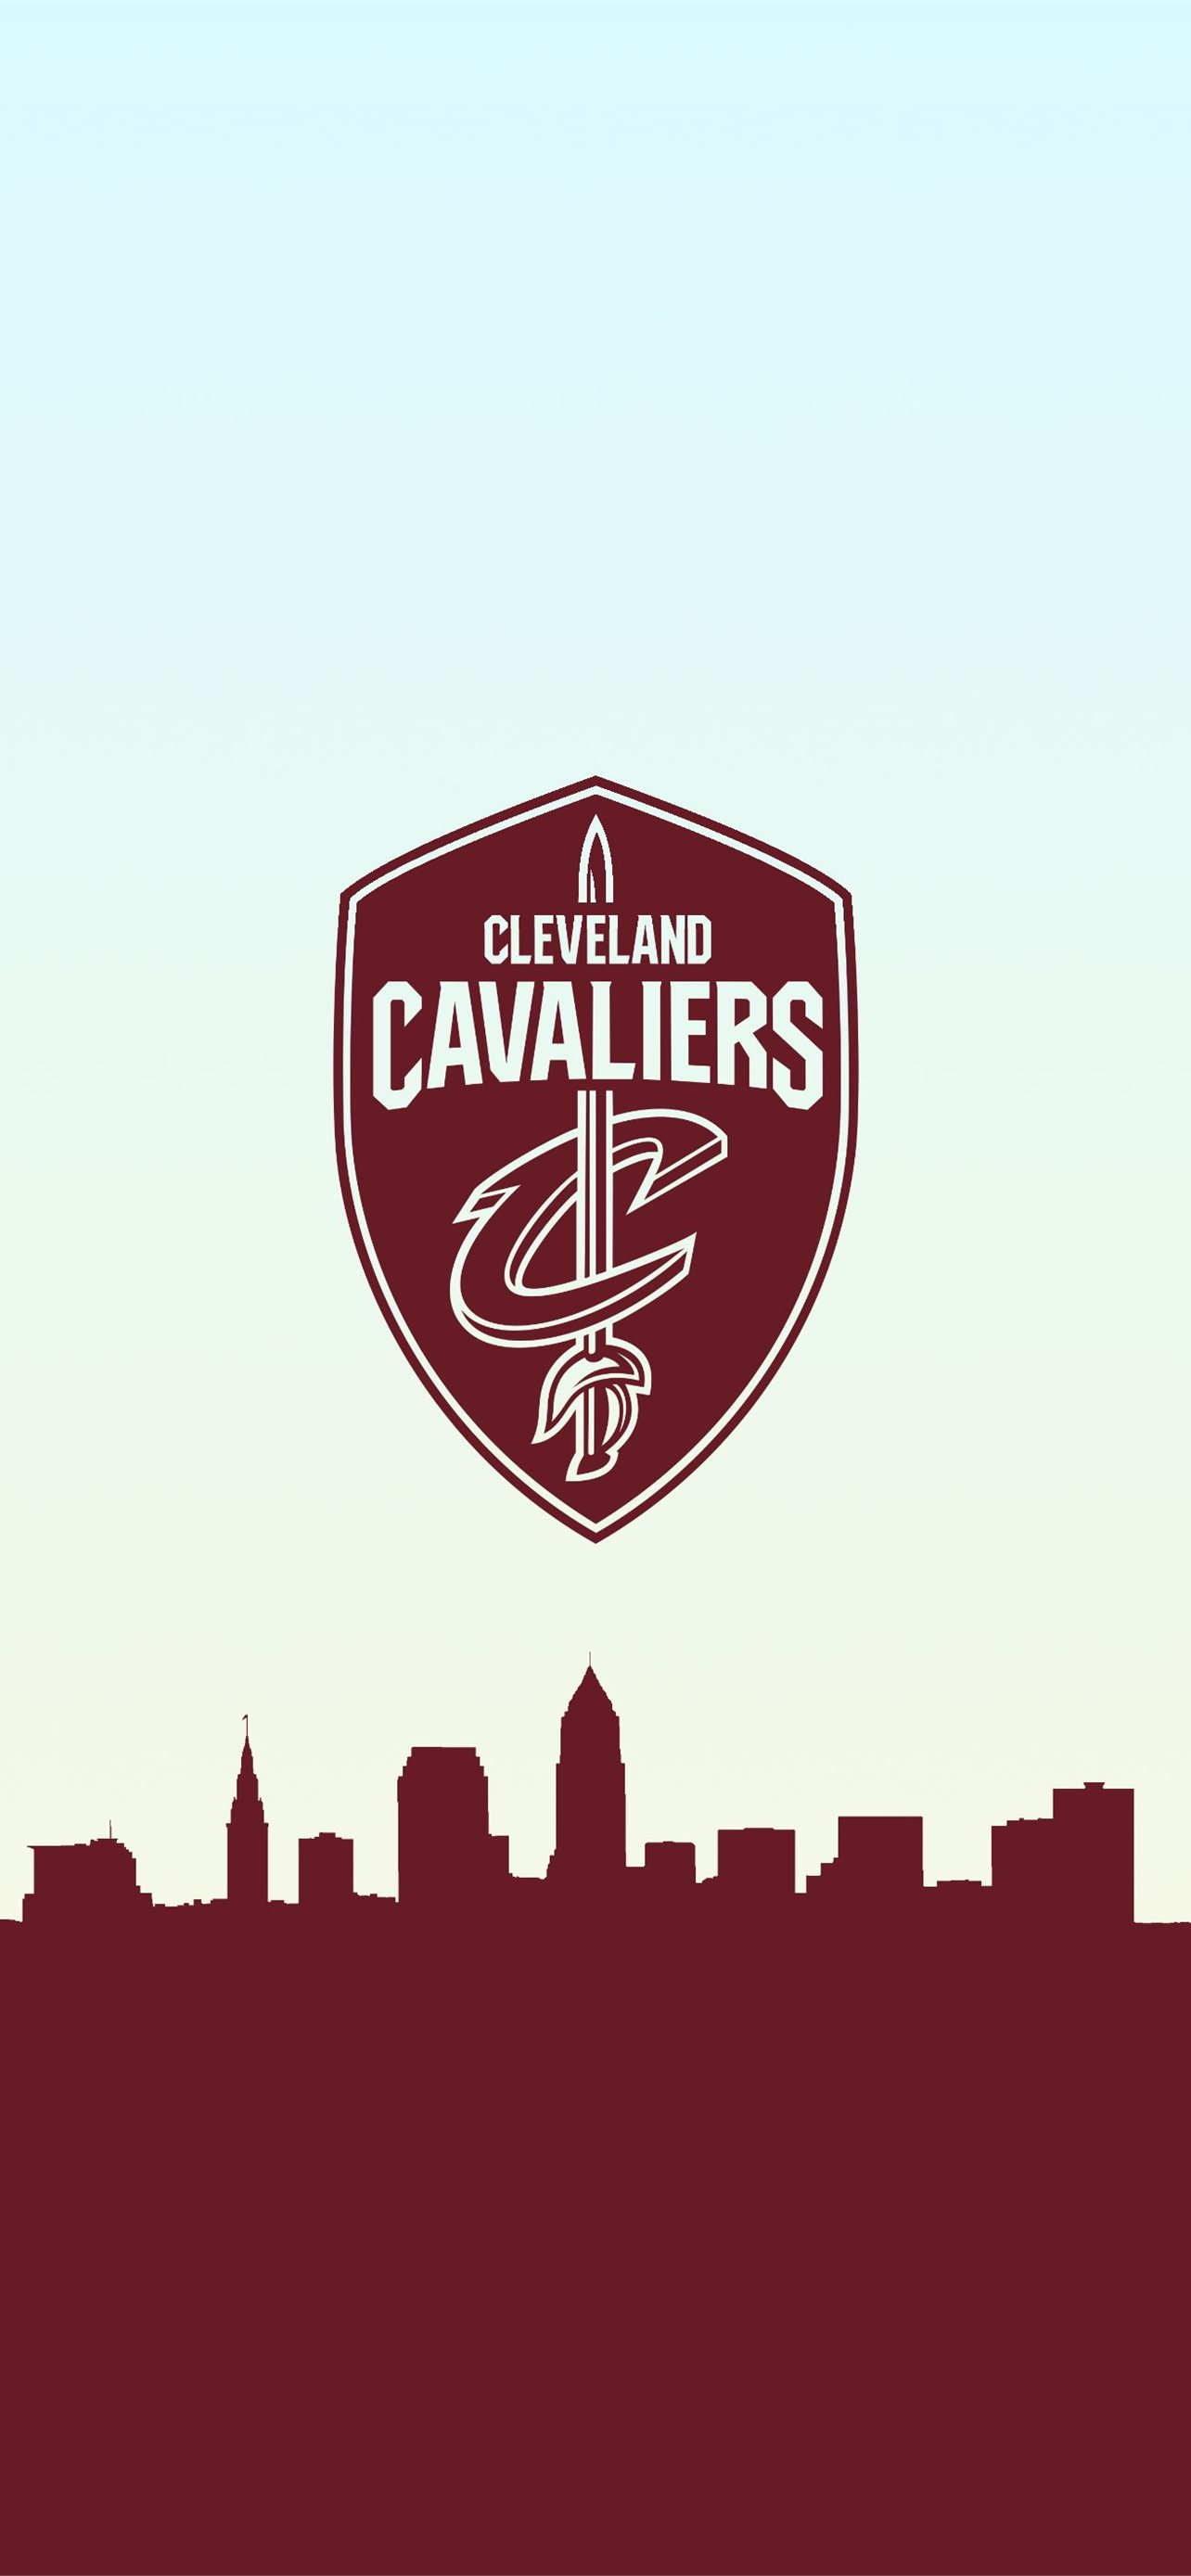 Share more than 69 cavaliers wallpaper - in.cdgdbentre